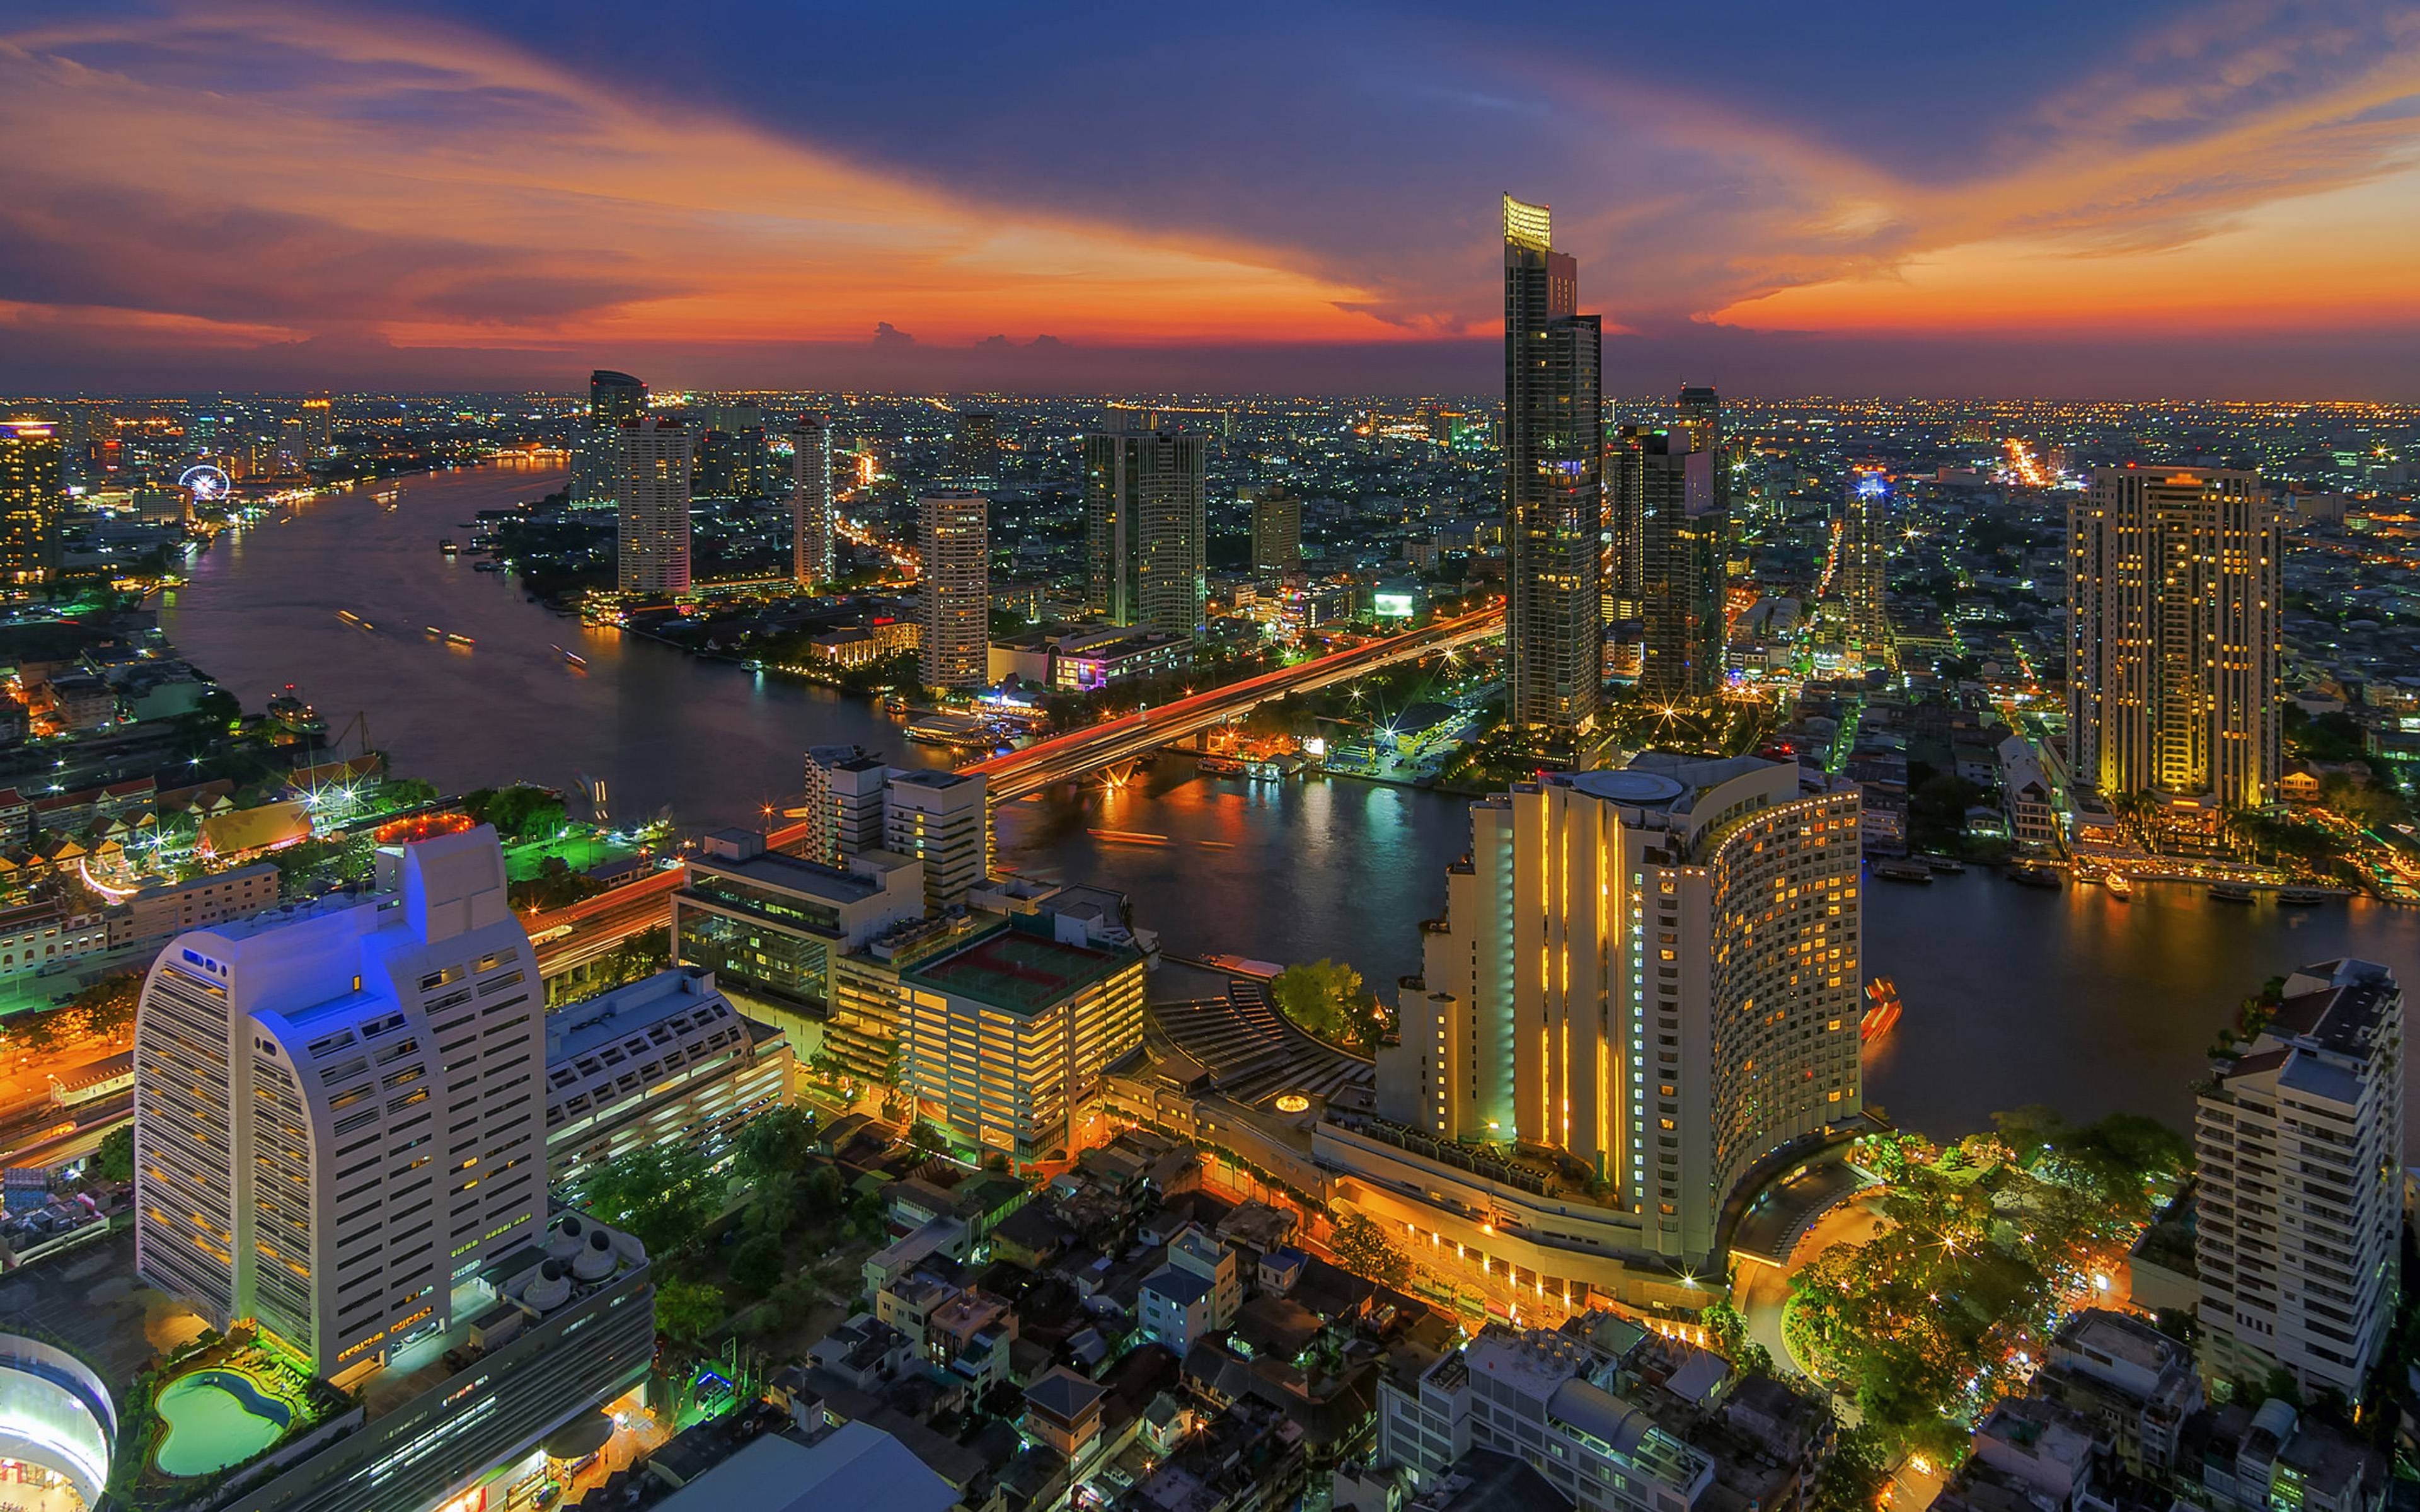 Bangkok Sunset Landscape Modern Architecture Buildings Nearby The Chao